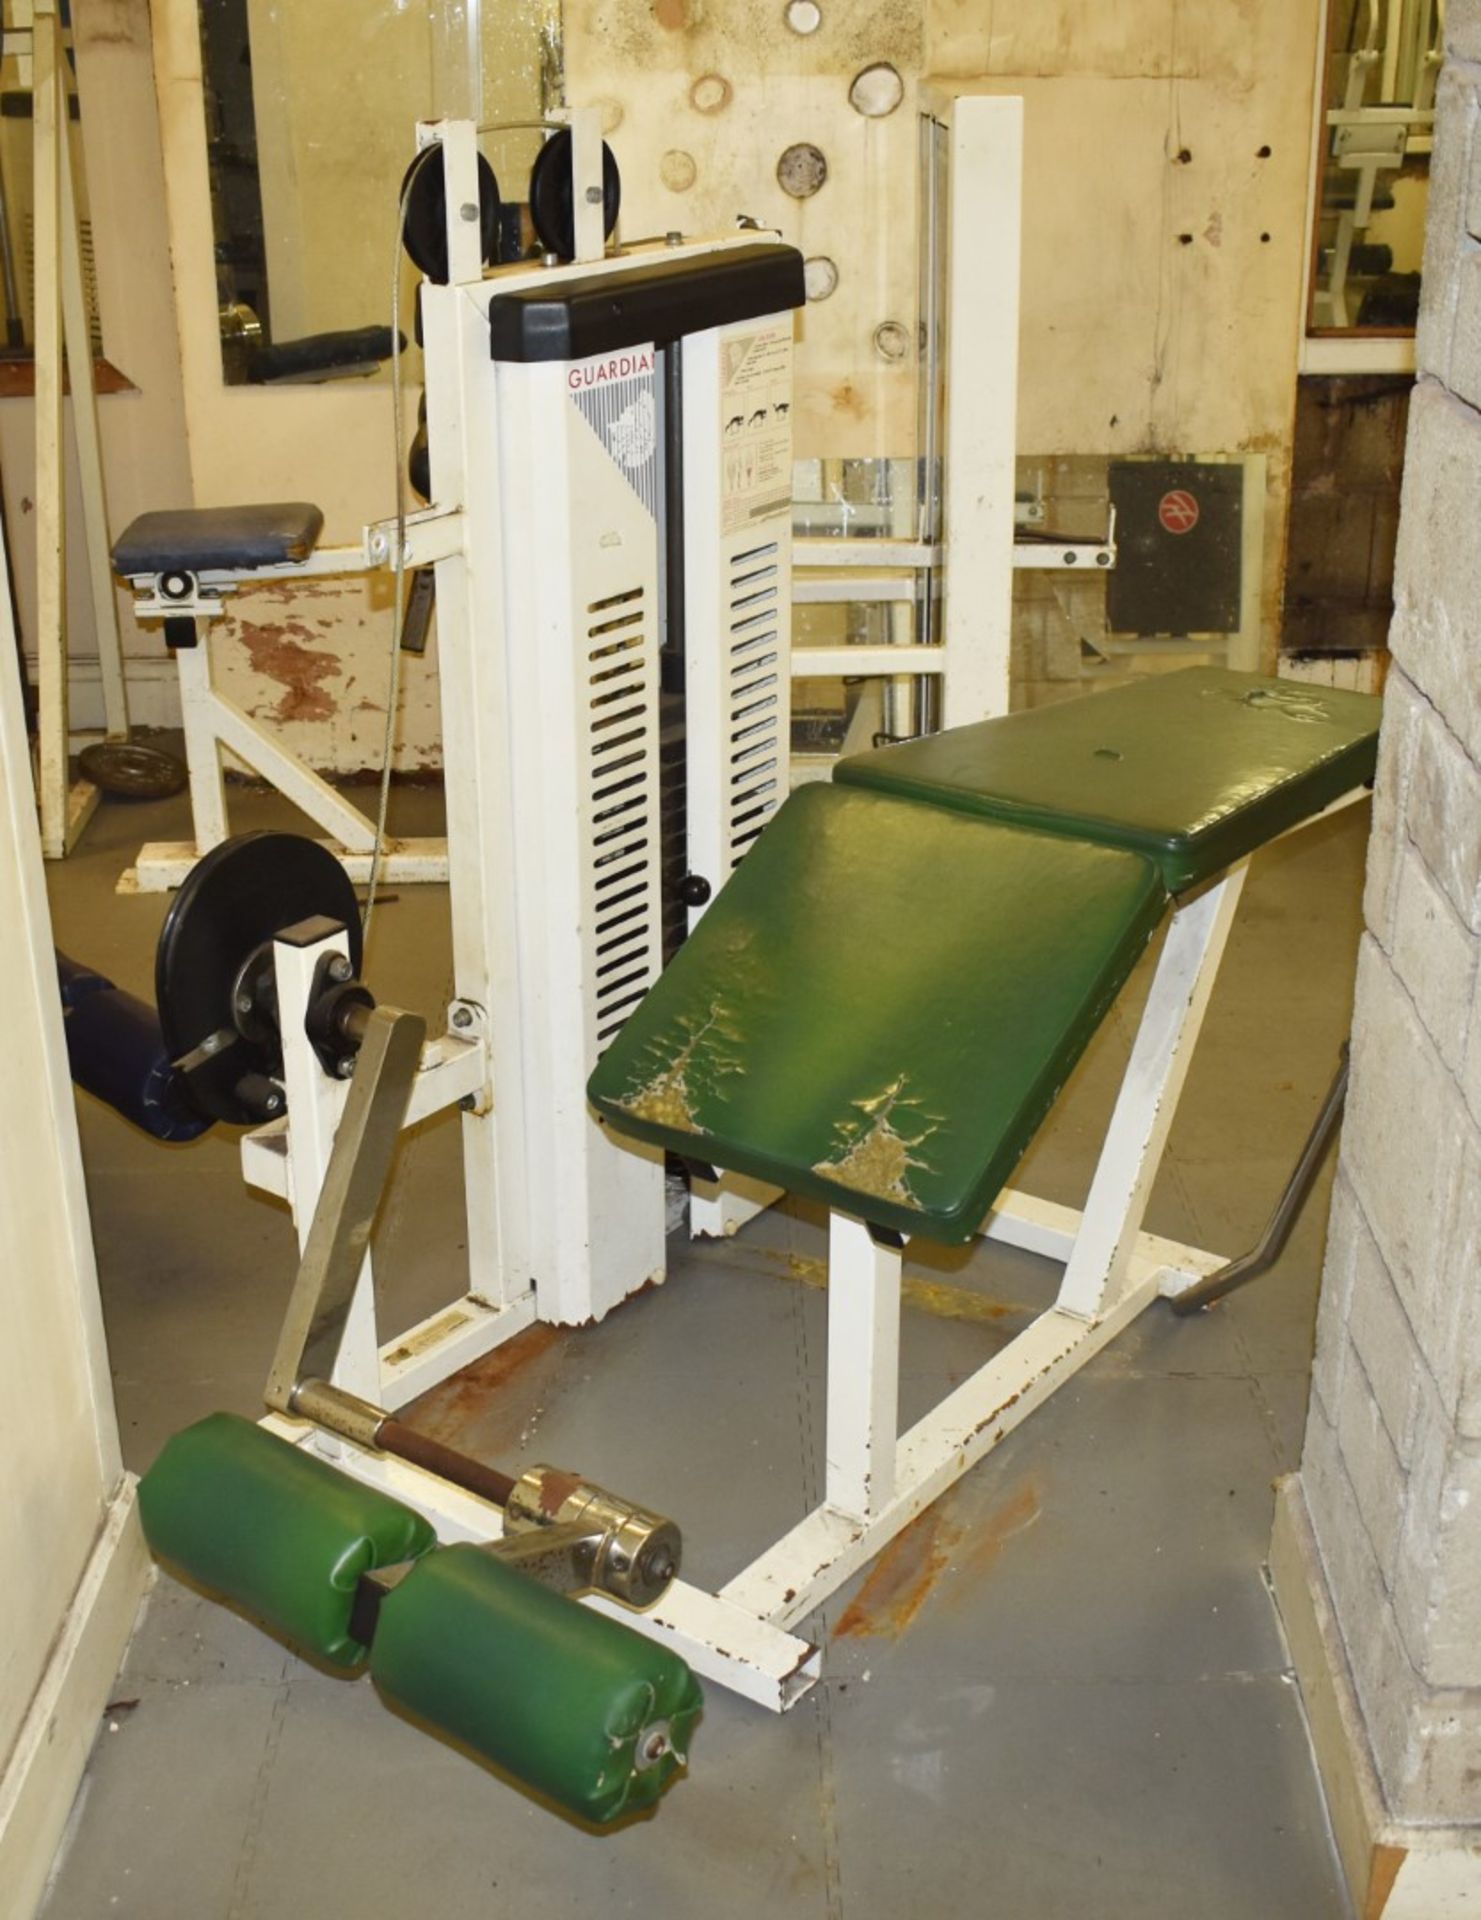 Contents of Bodybuilding and Strongman Gym - Includes Approx 30 Pieces of Gym Equipment, Floor Mats, - Image 34 of 95